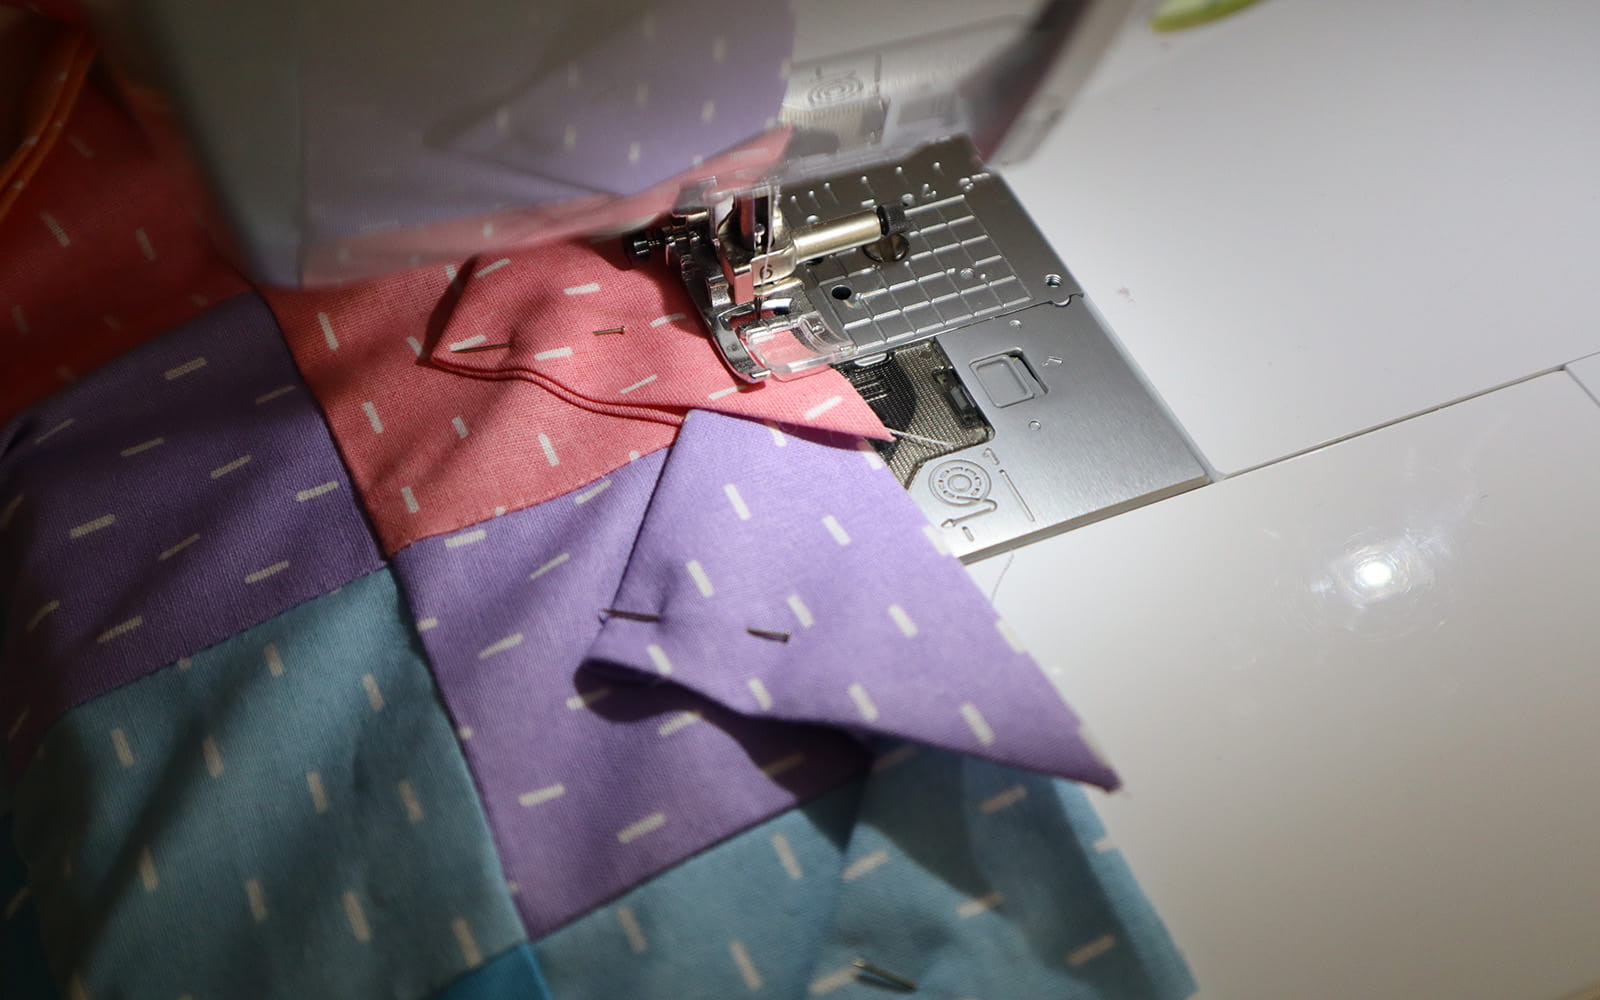 Triangles being stitched to the edge of the square fabric